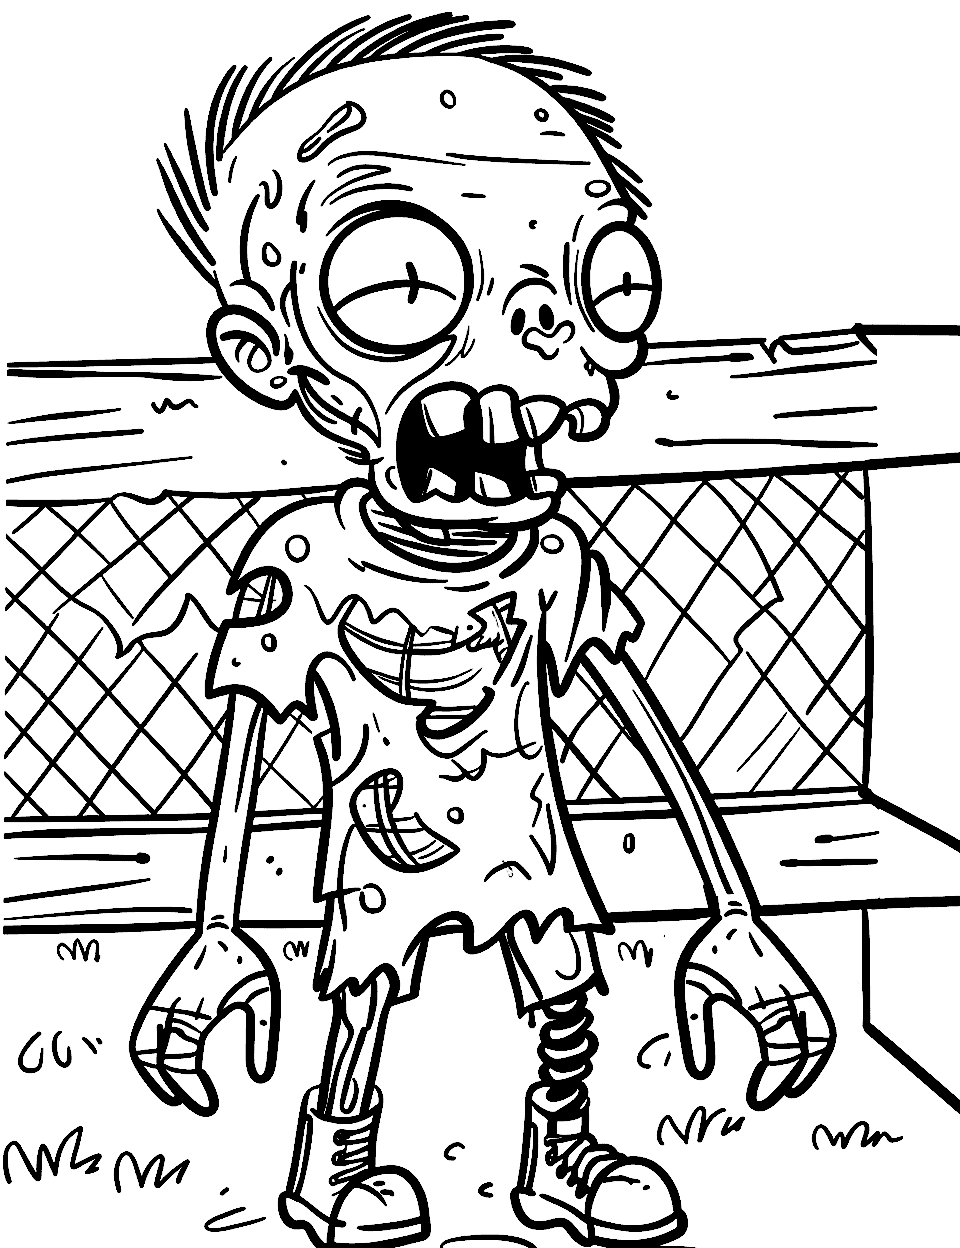 Zombie at the Zoo Coloring Page - A zombie visiting an empty zoo.